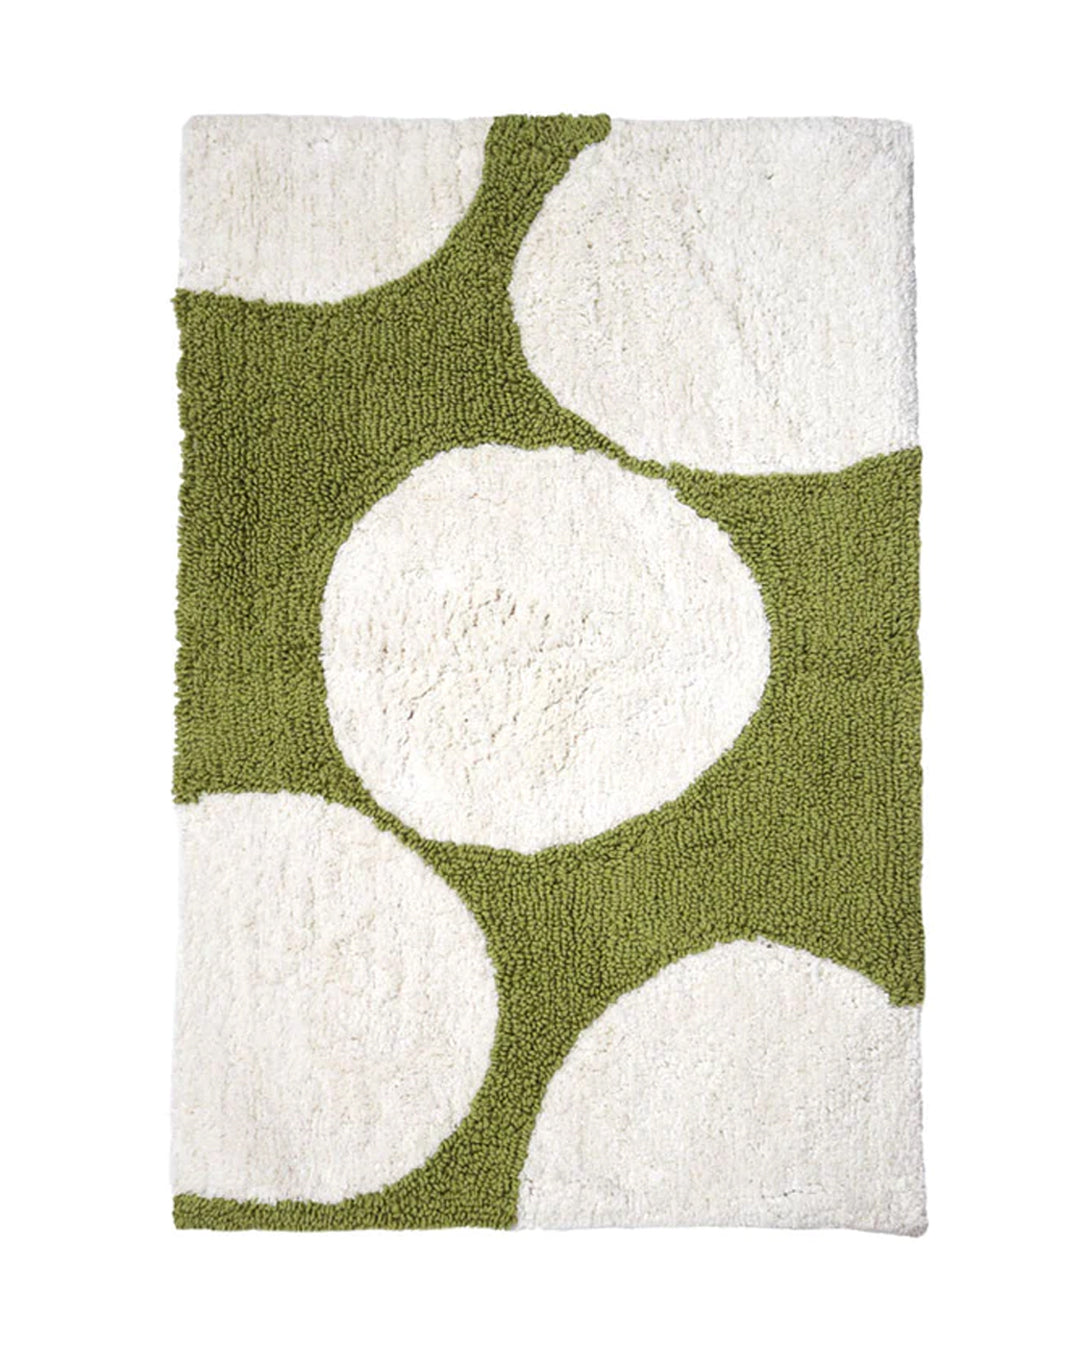 Enjoy the soft organic curves of the pebble kids bath mat. The large pebble pattern in olive and ecru will add some fun as the kids step in an out of the bath. High on absorbency, these bath mats are made from plush tufted cotton that feels delightful under your toes, and feature a latex non-slip backing.